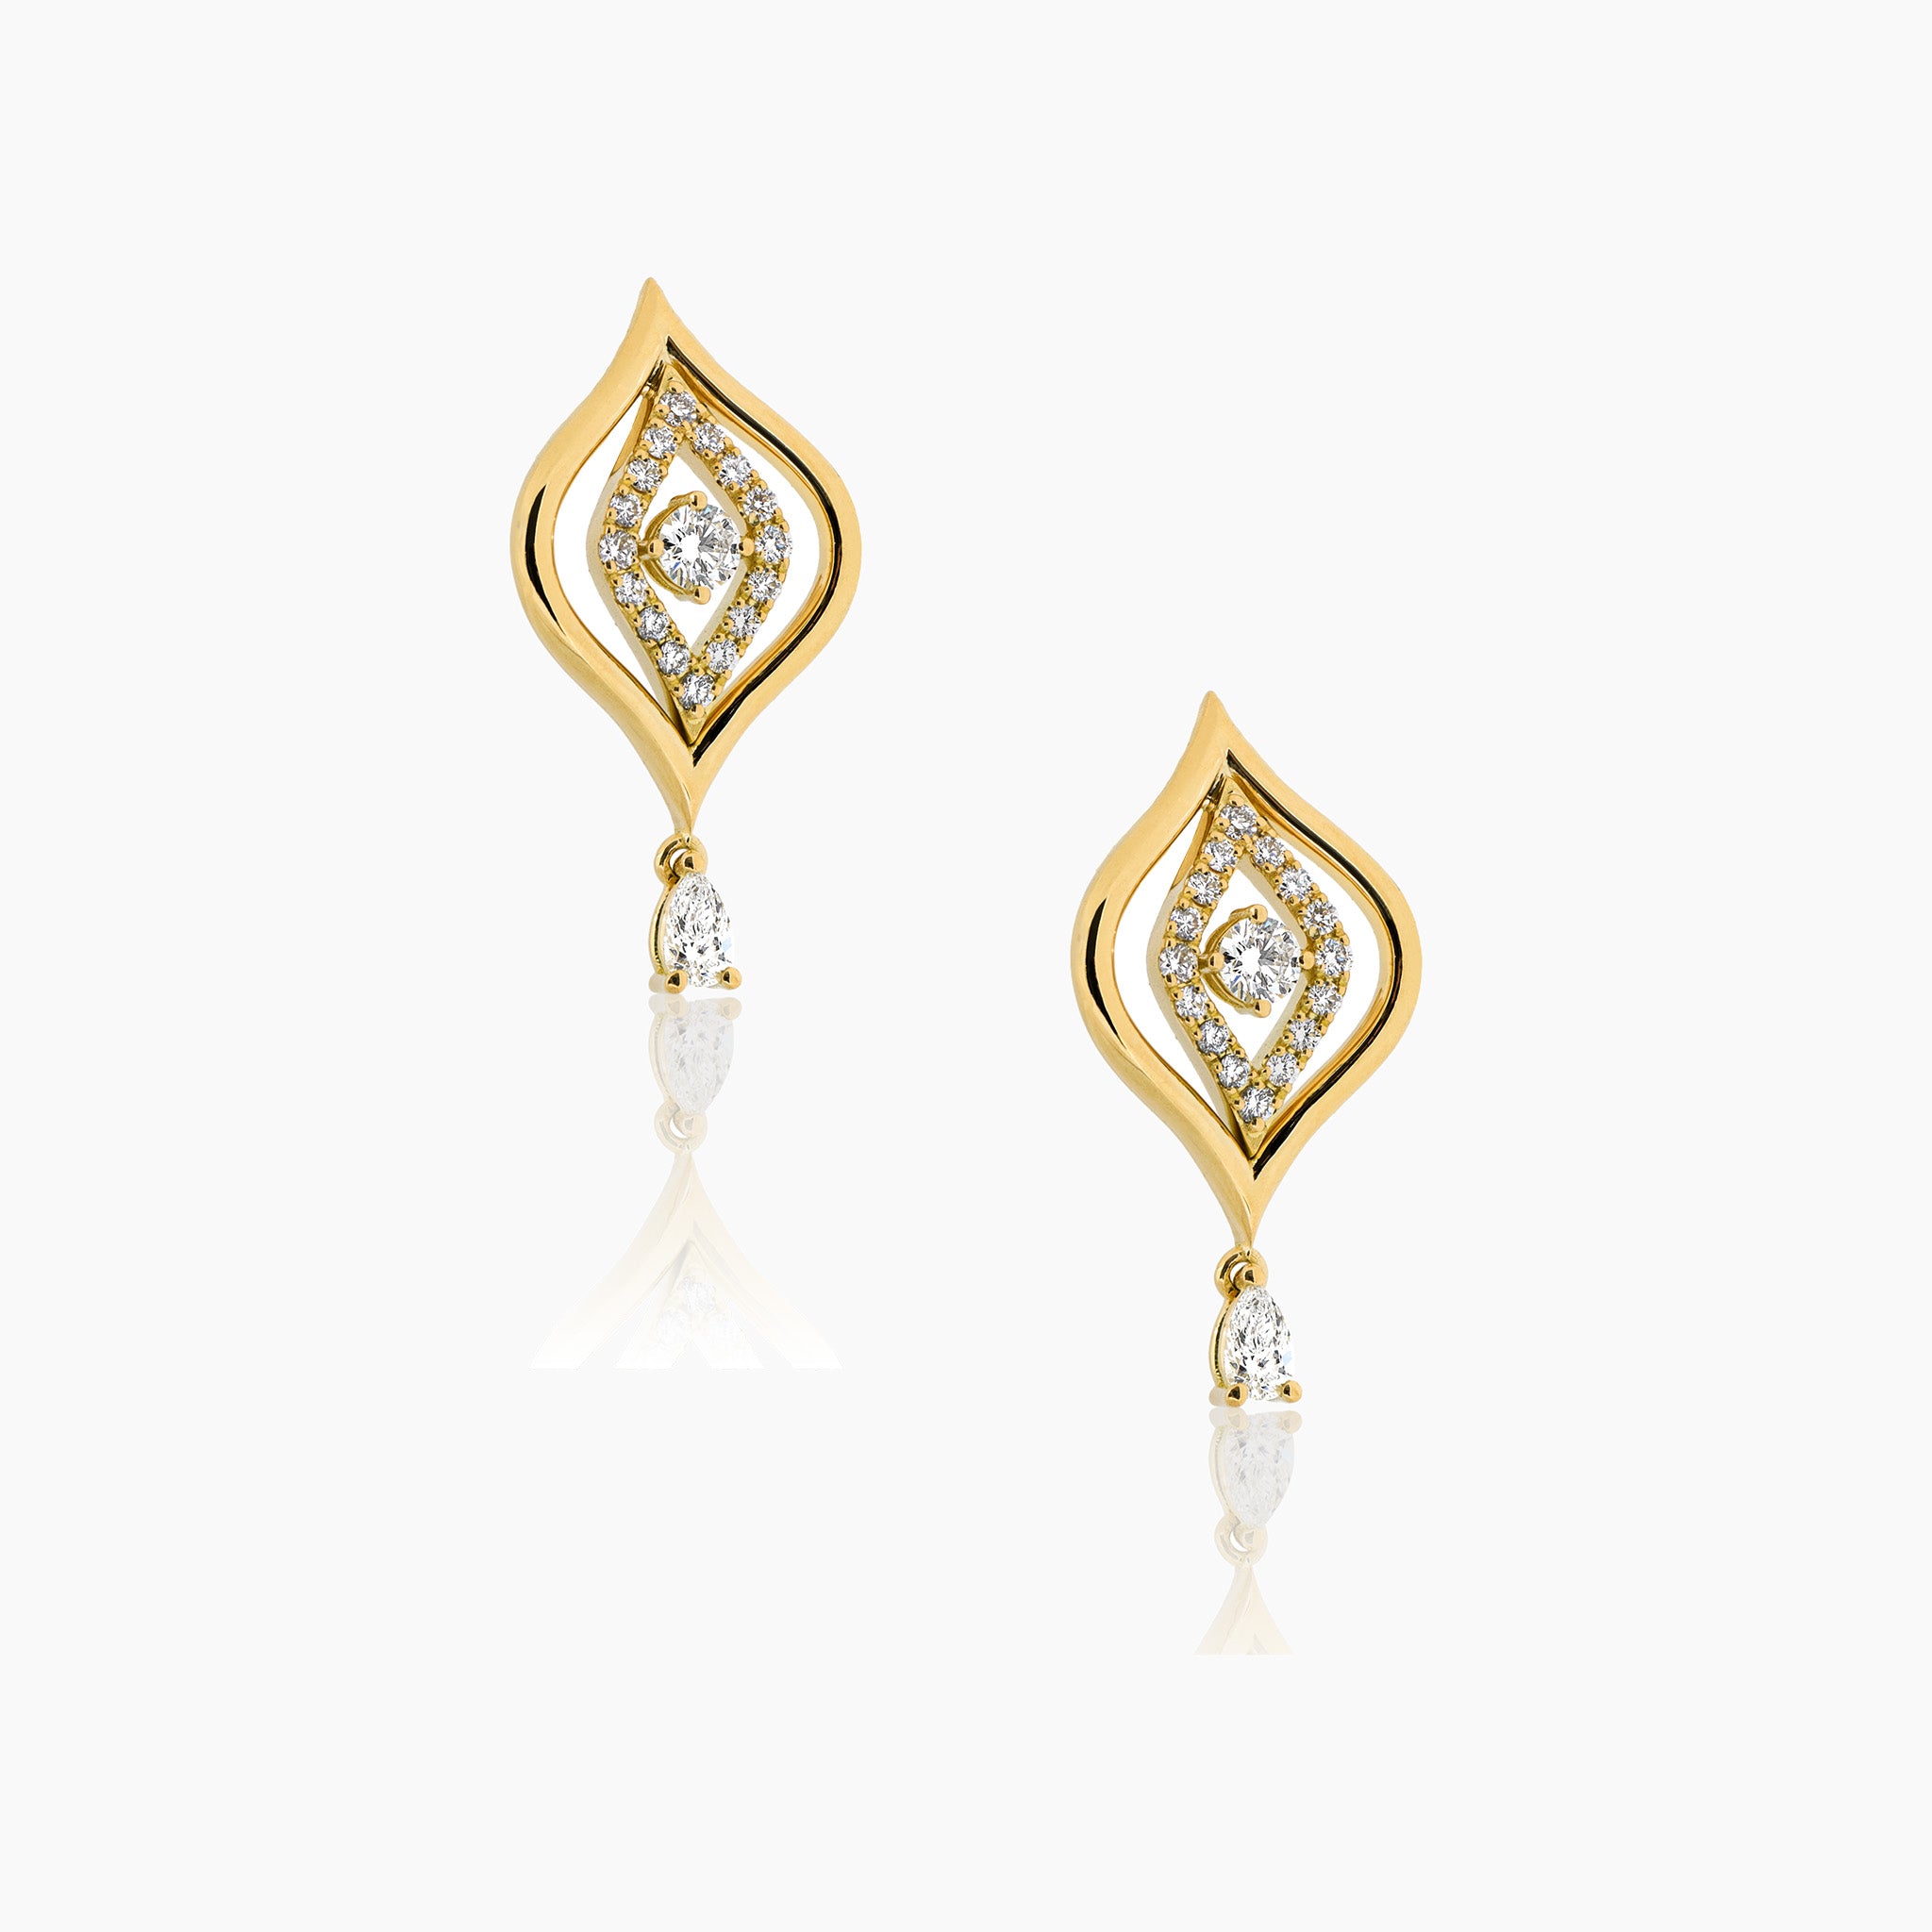 Yellow gold and diamond earrings with a captivating Evil Eye design, set against a clean off-white background.